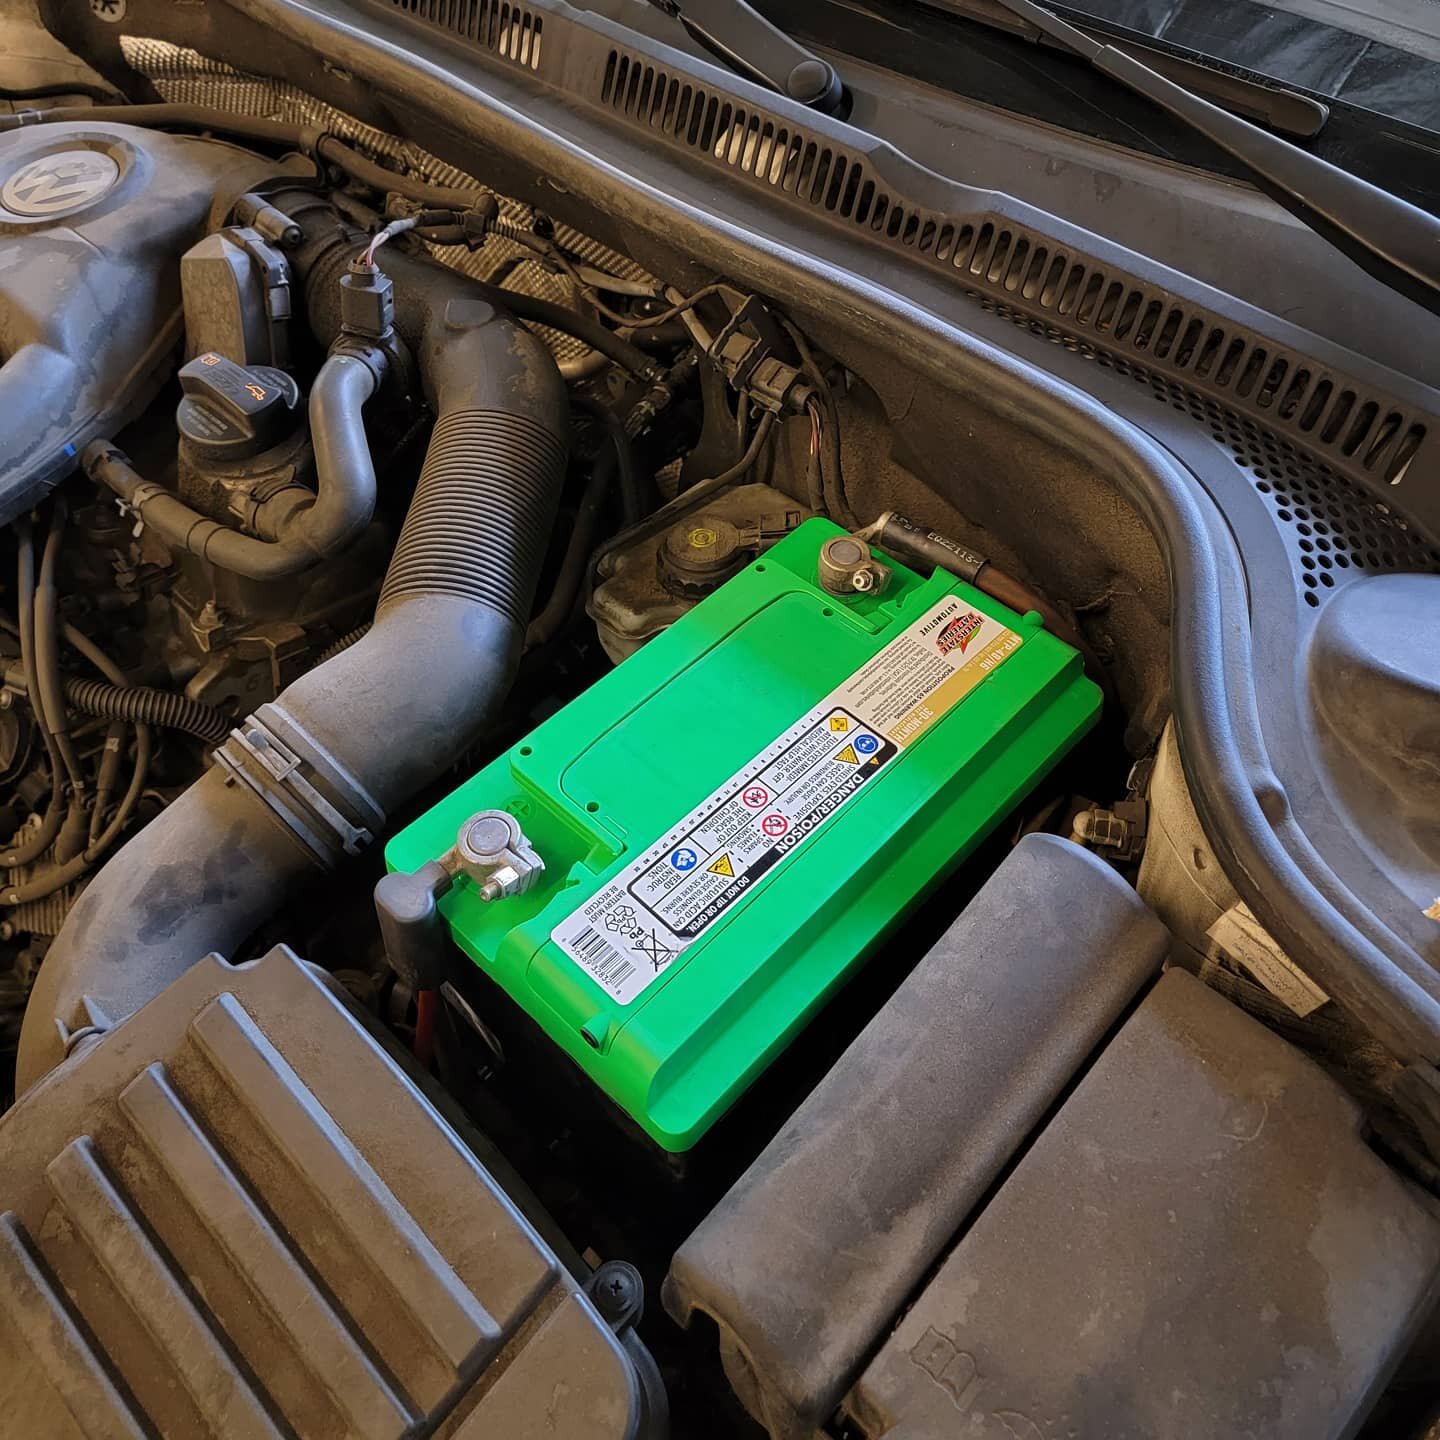 Did we mention we are an Interstate Battery dealer? If you need a new battery, give us a ring and get one of the best batteries in the industry! 
.
.
.
#tiresquad #tiresquadautorepair #interstate #interstatebatteries